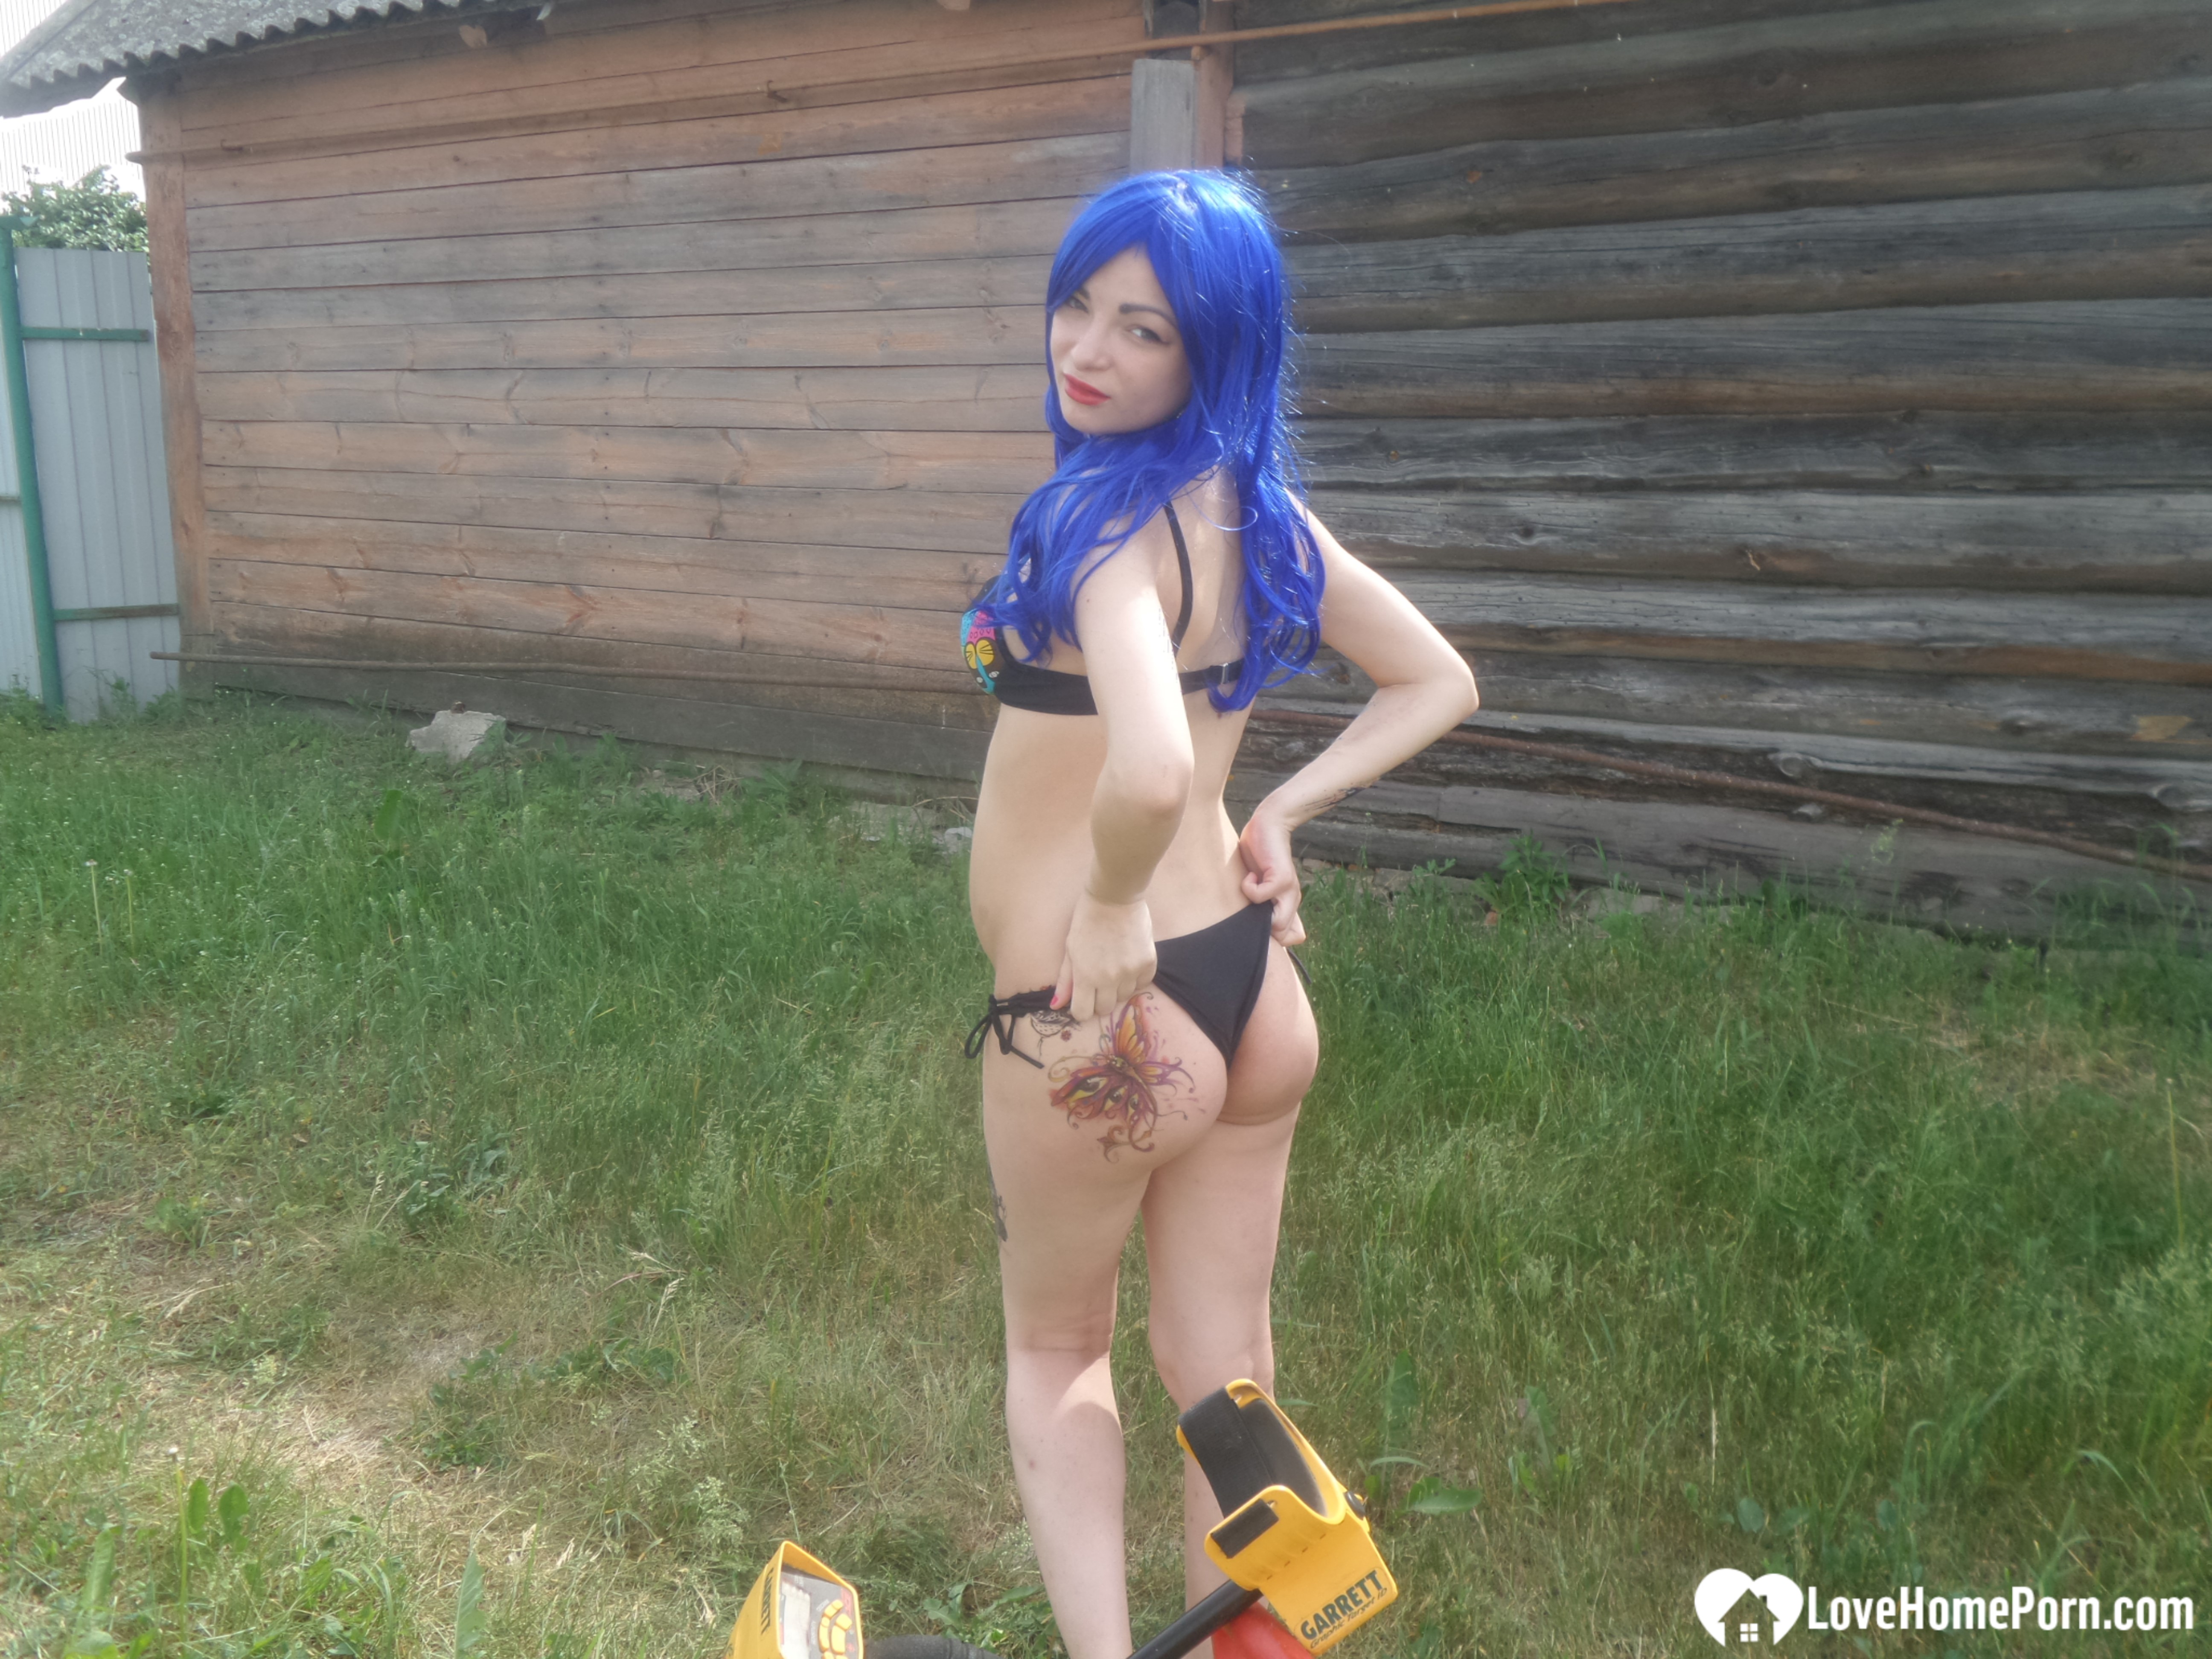 Blue-haired beauty showing her bust while gardening